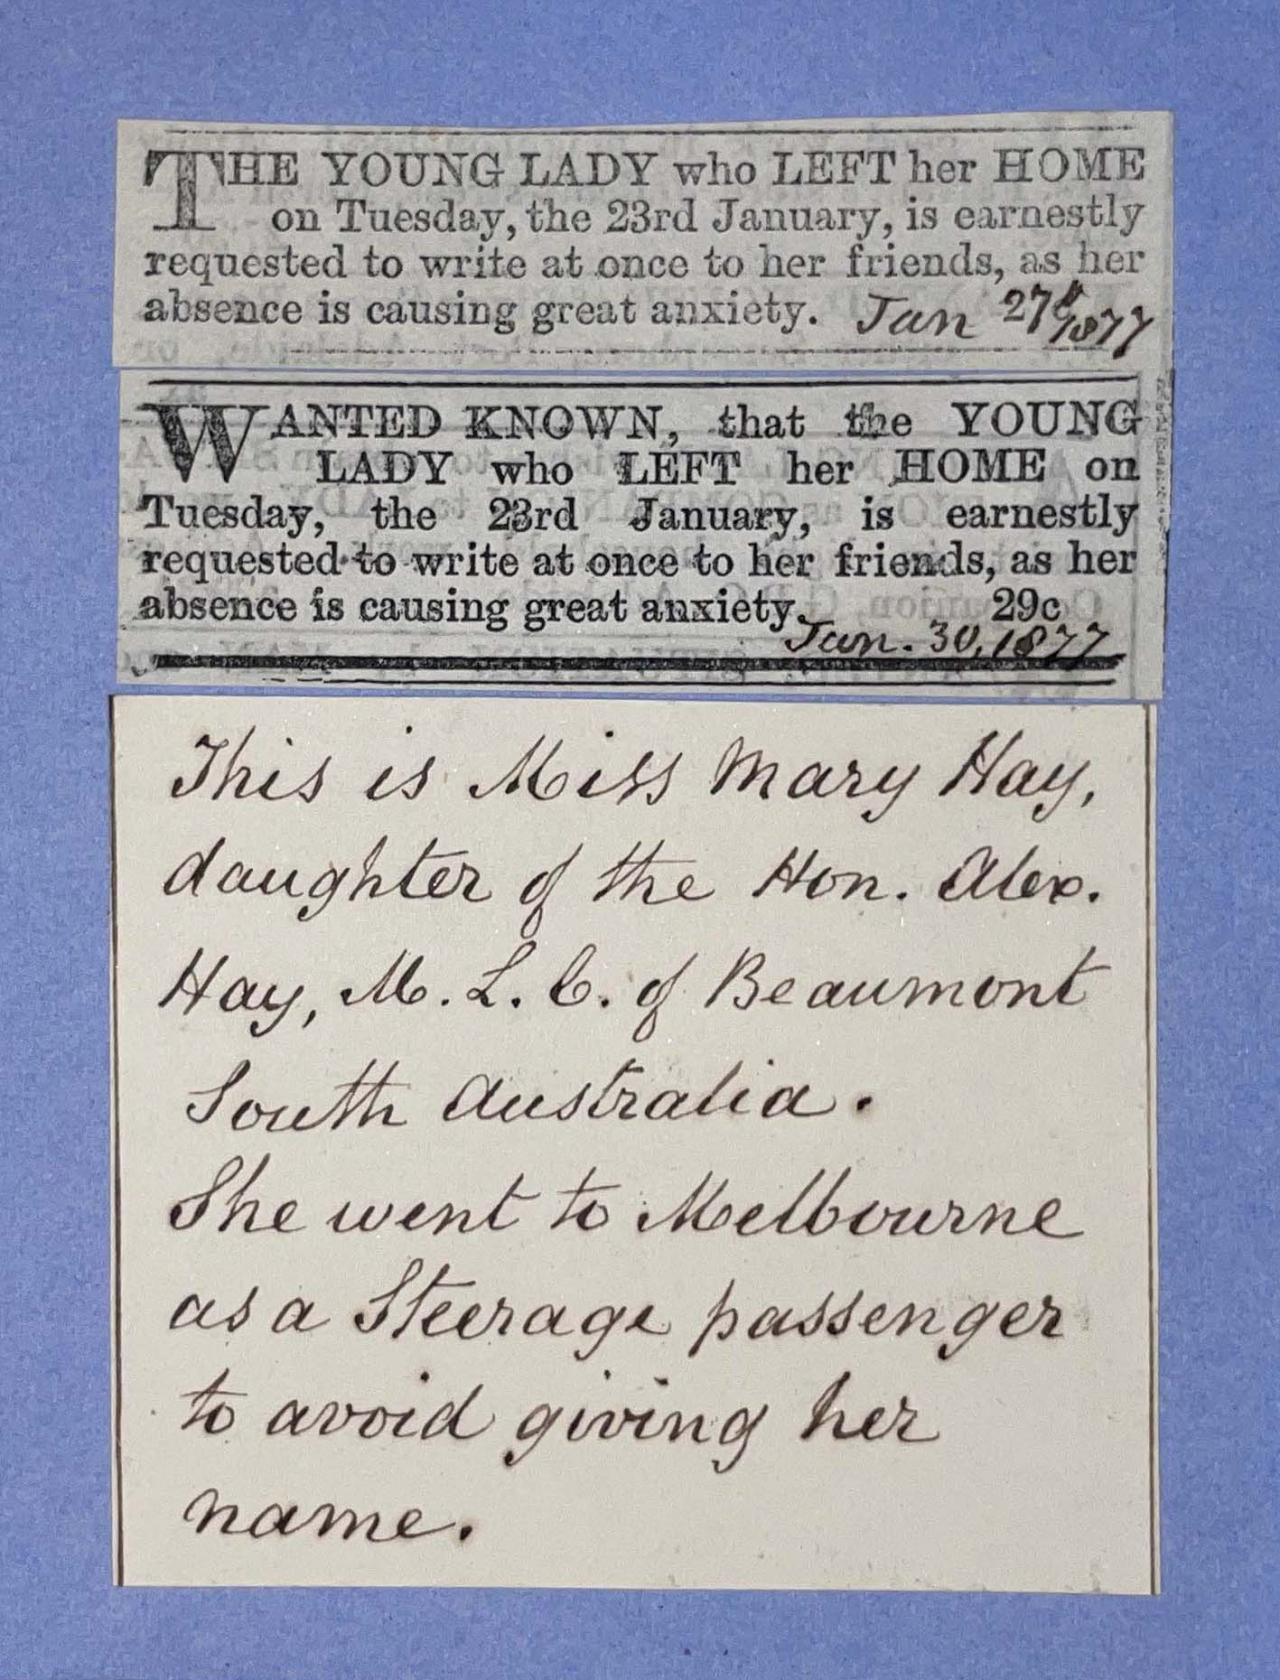 Close up of the newspaper clippings in the Footprints book with a note